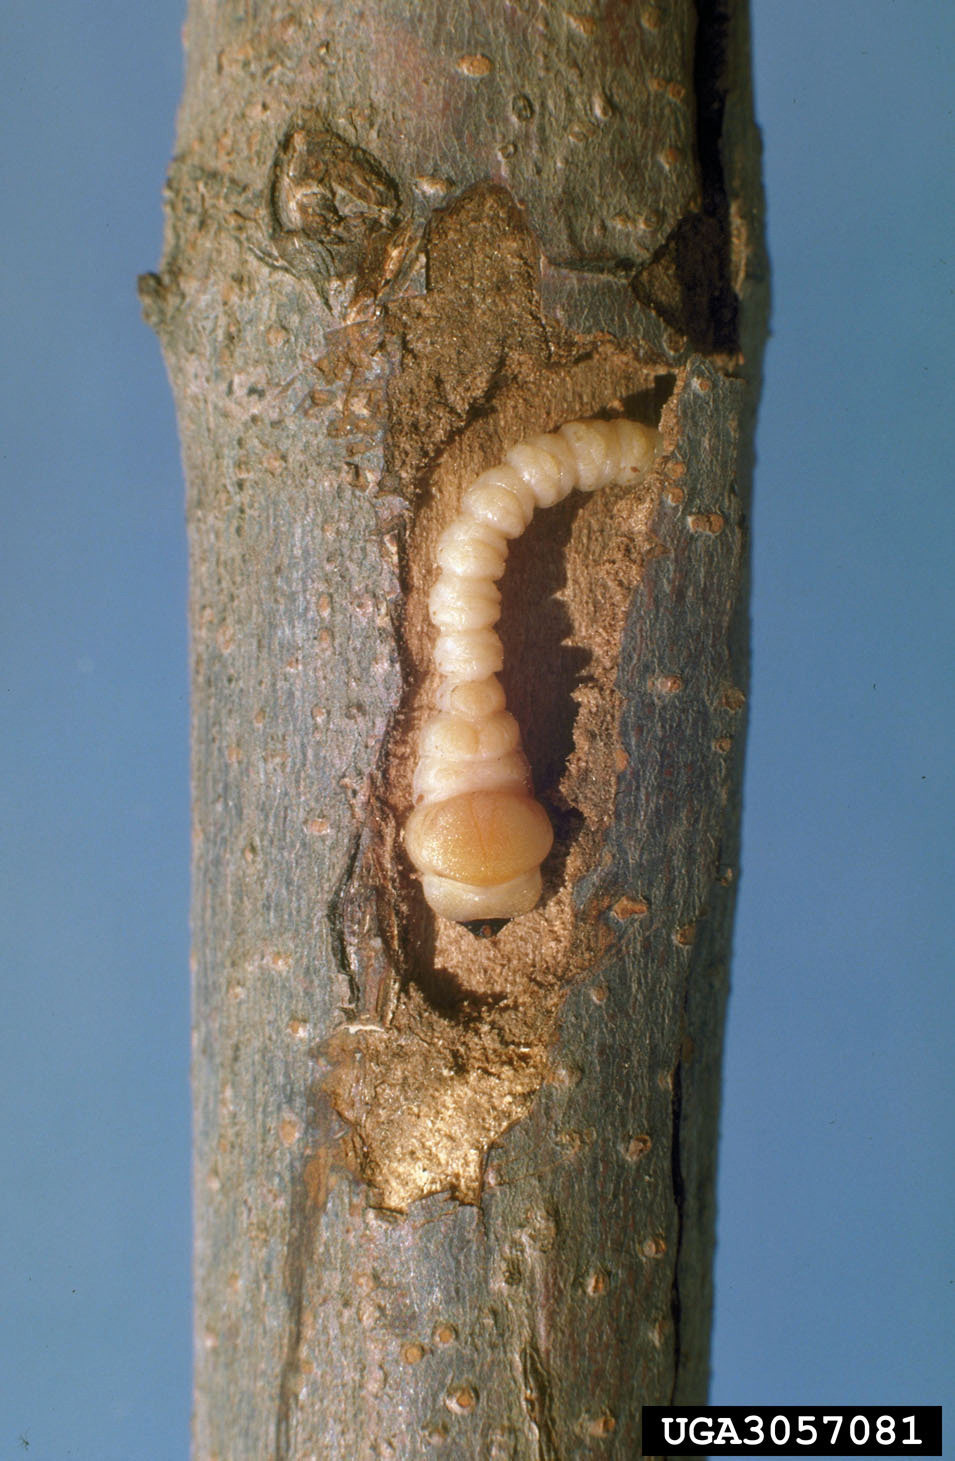 Tunnels appear under or through the bark when larva of the flatheaded appletree borer feed on trees.